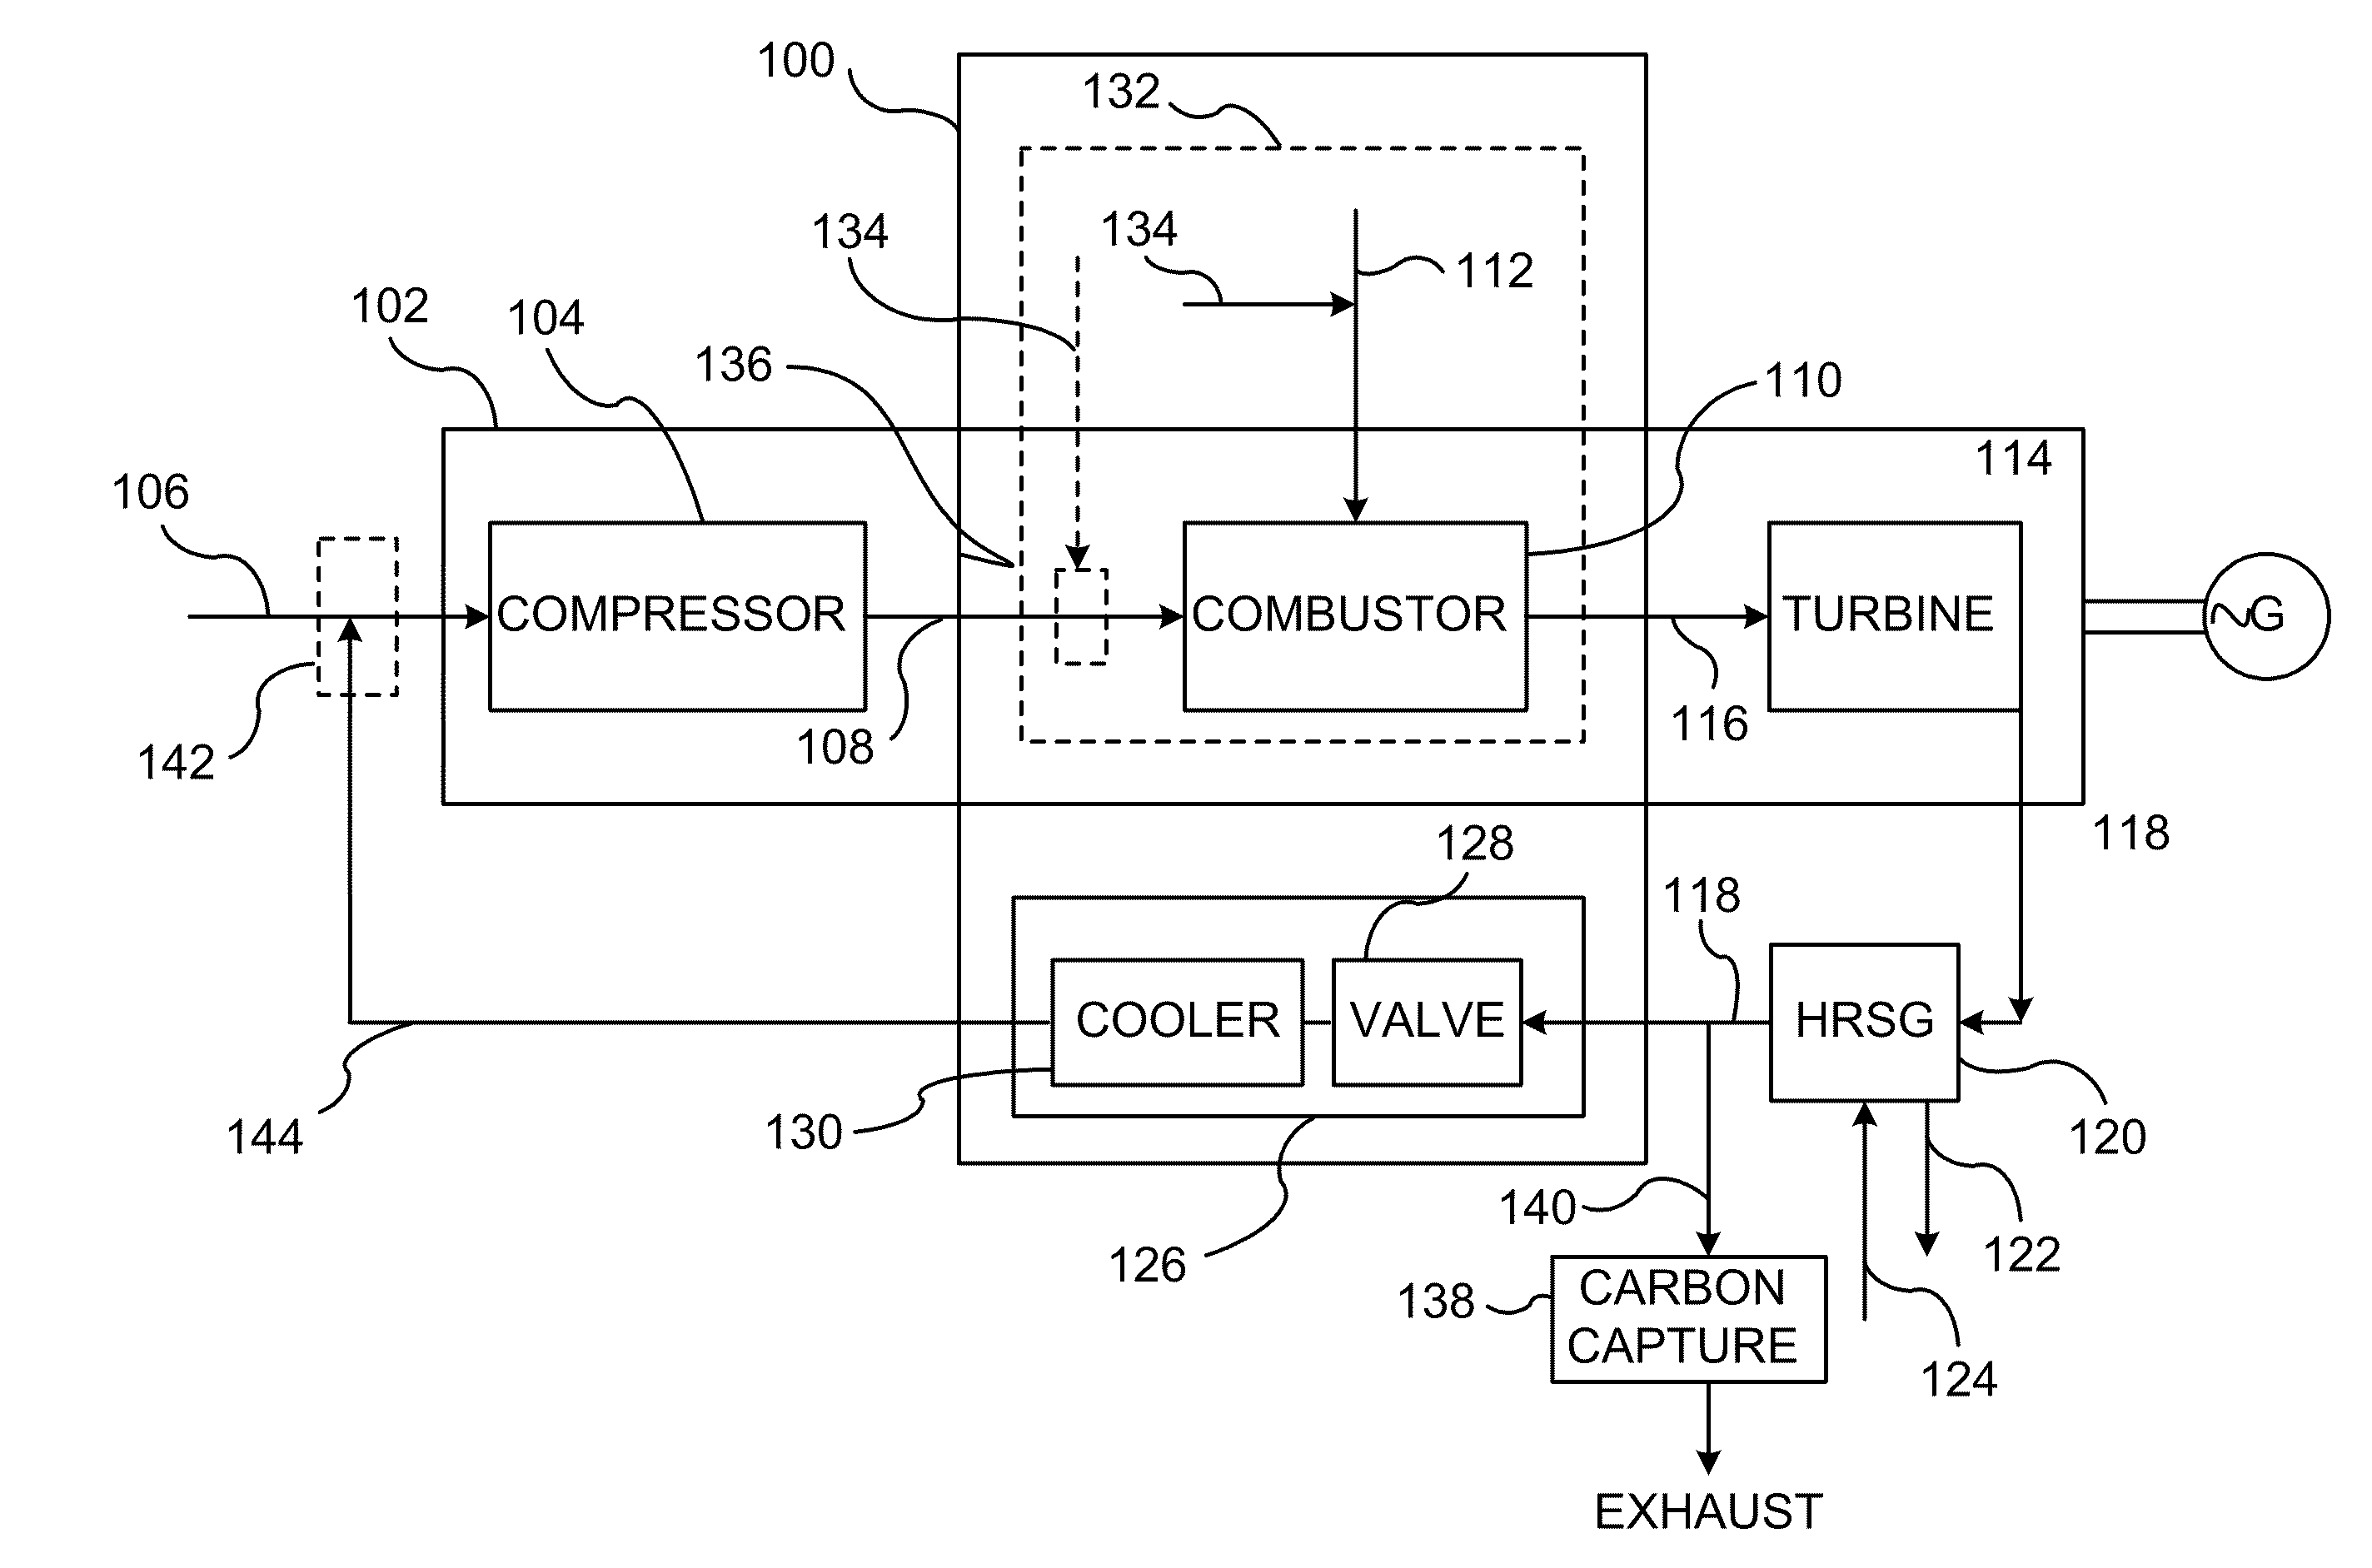 System and method of improving emission performance of a gas turbine